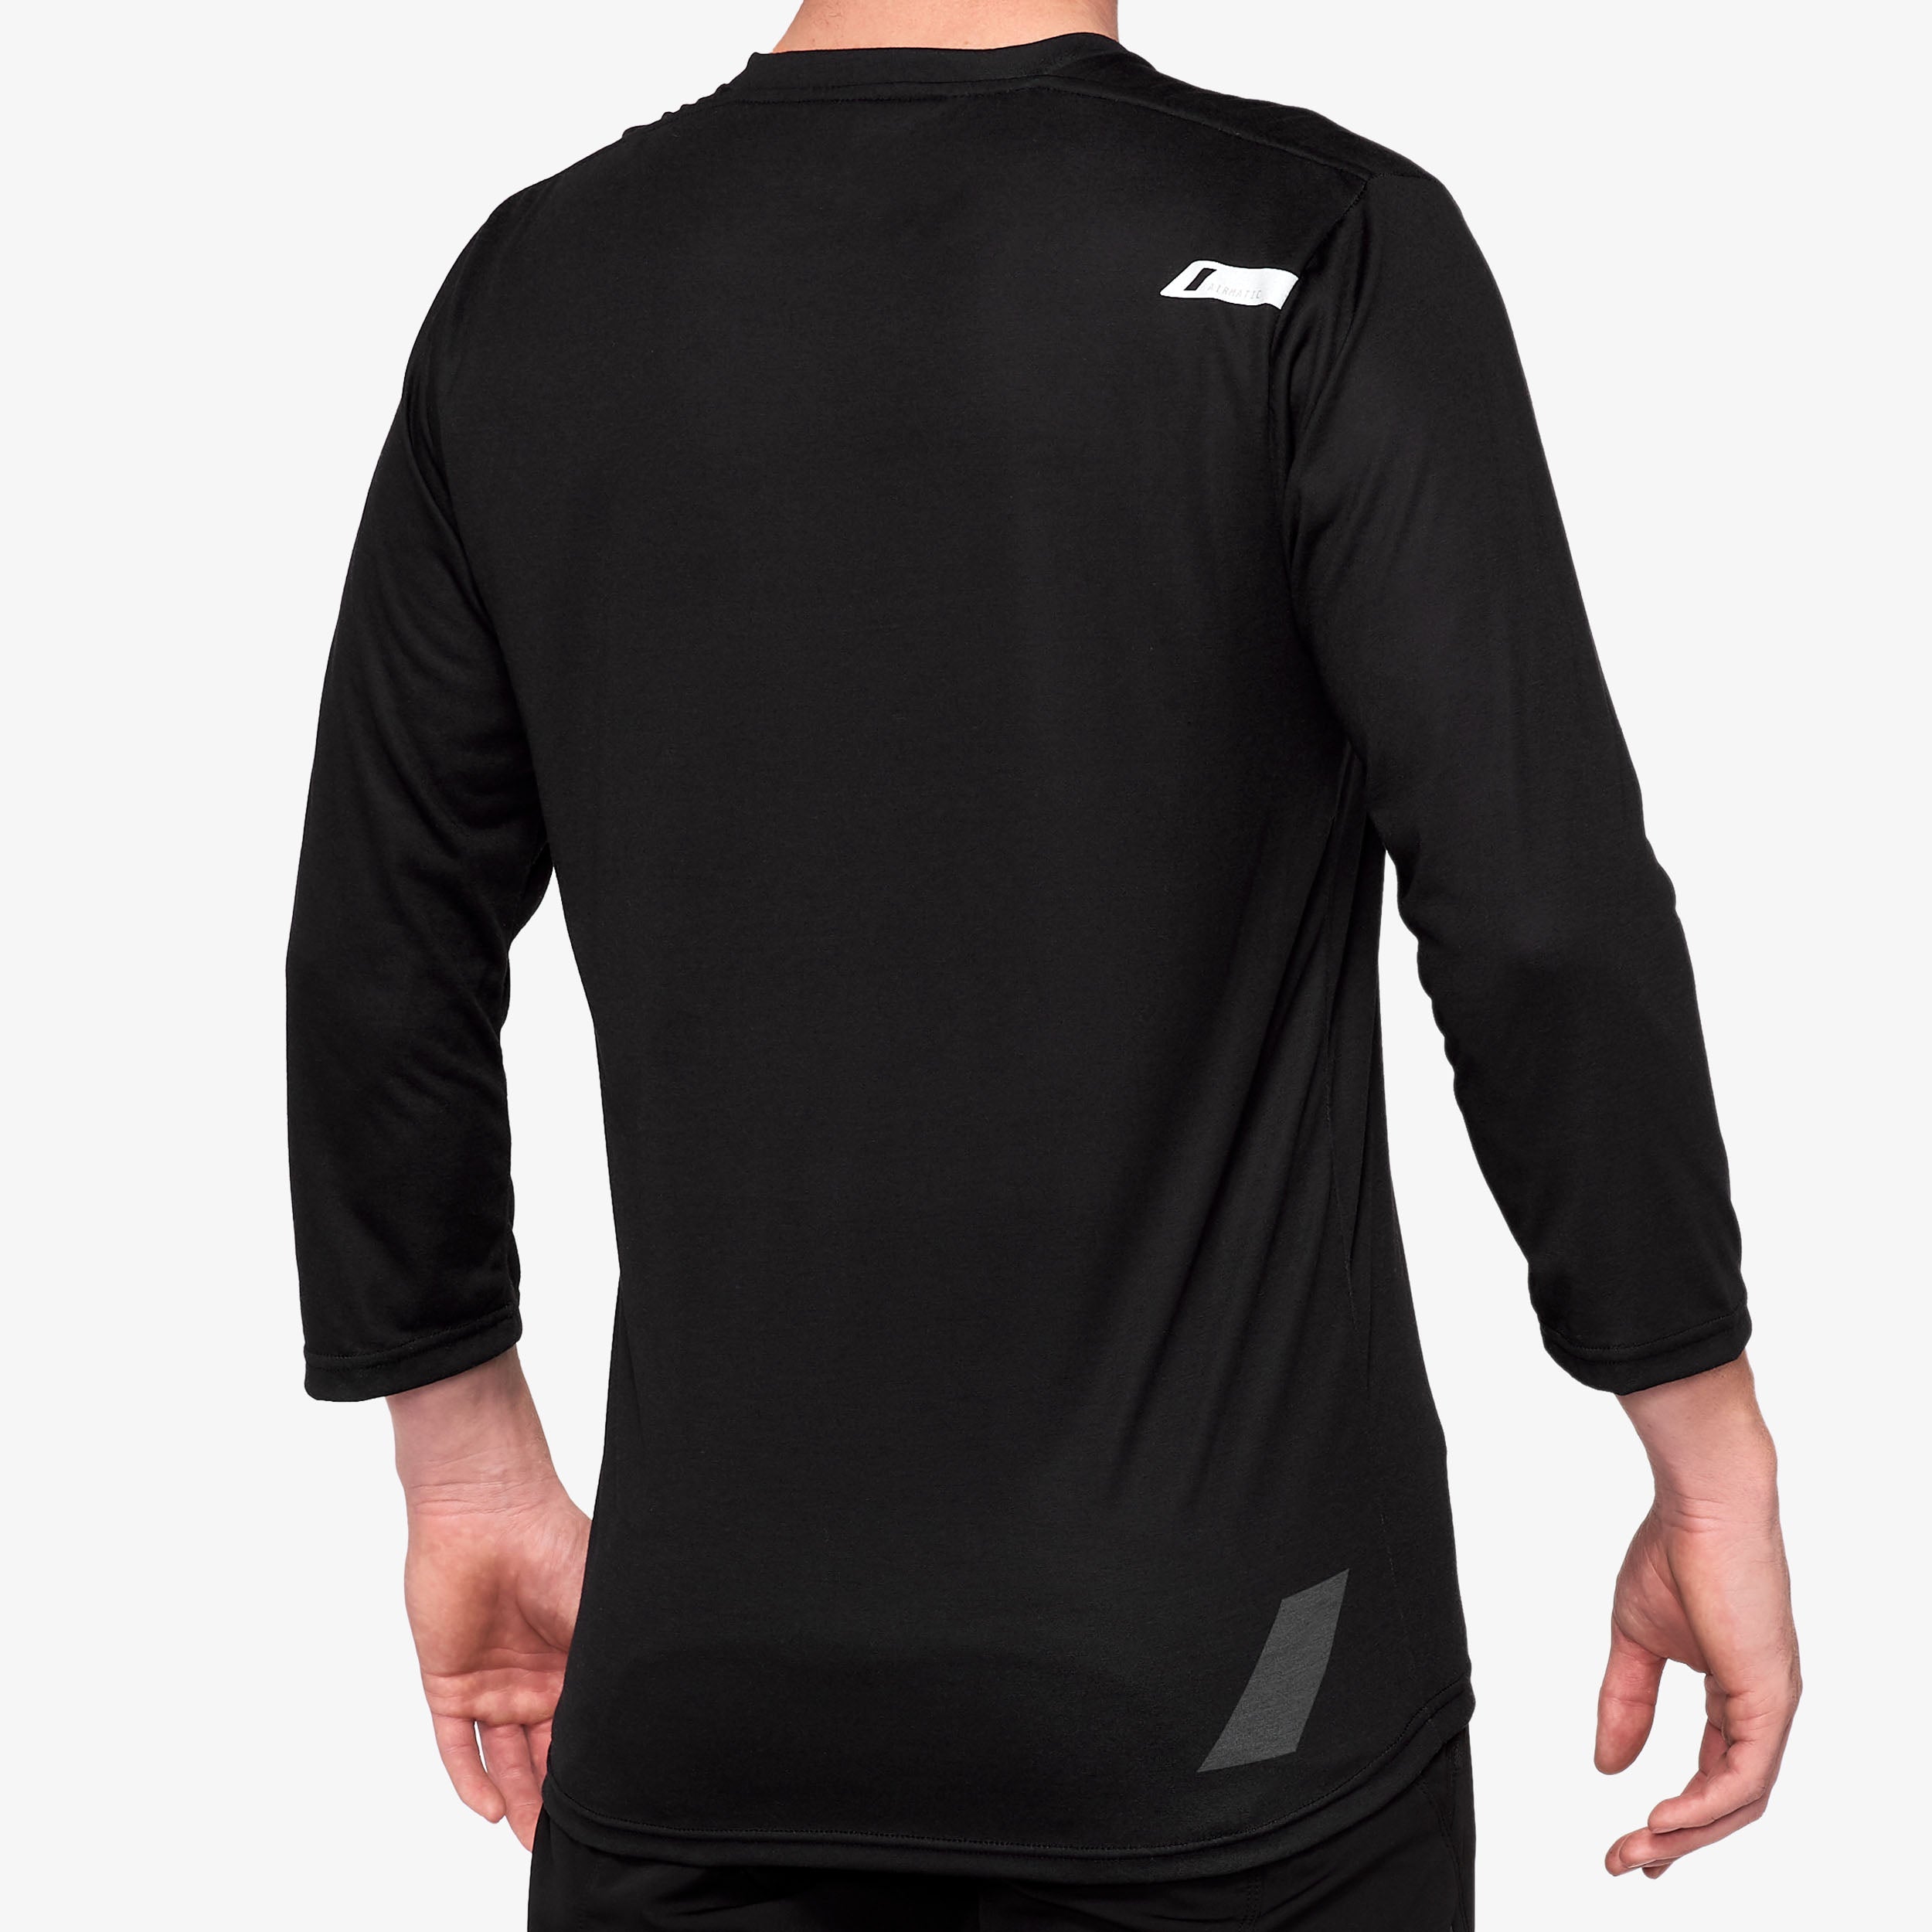 AIRMATIC 3/4 Sleeve Jersey Black 23 - Secondary